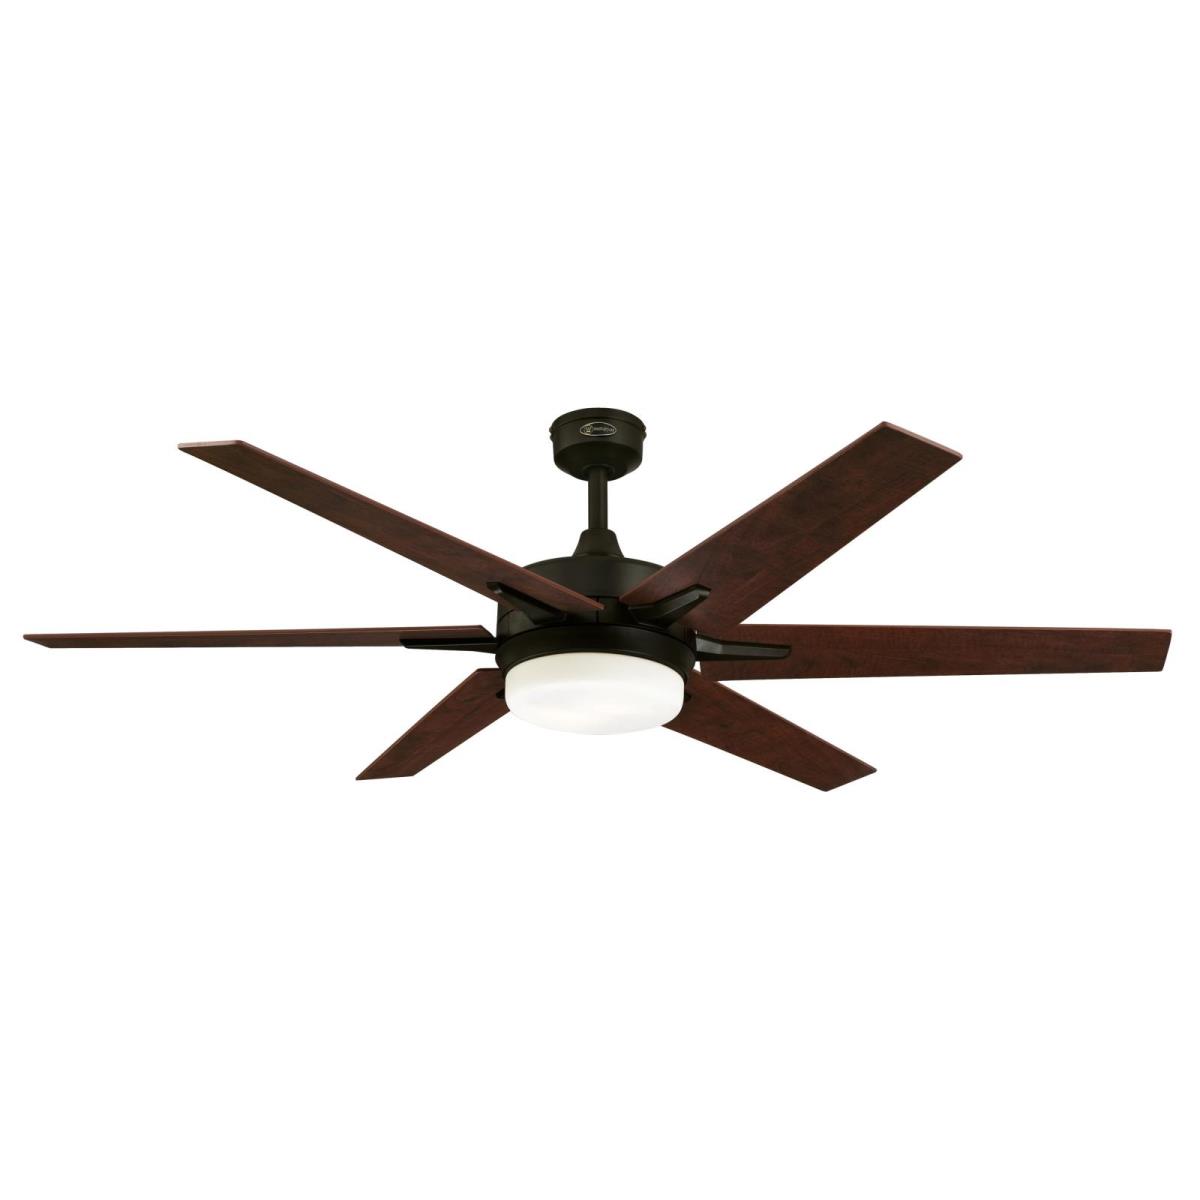 60" Oil Rubbed Bronze Finish Reversible Blades (Applewood/Cherry) Includes Light Kit with Opal Frosted Glass